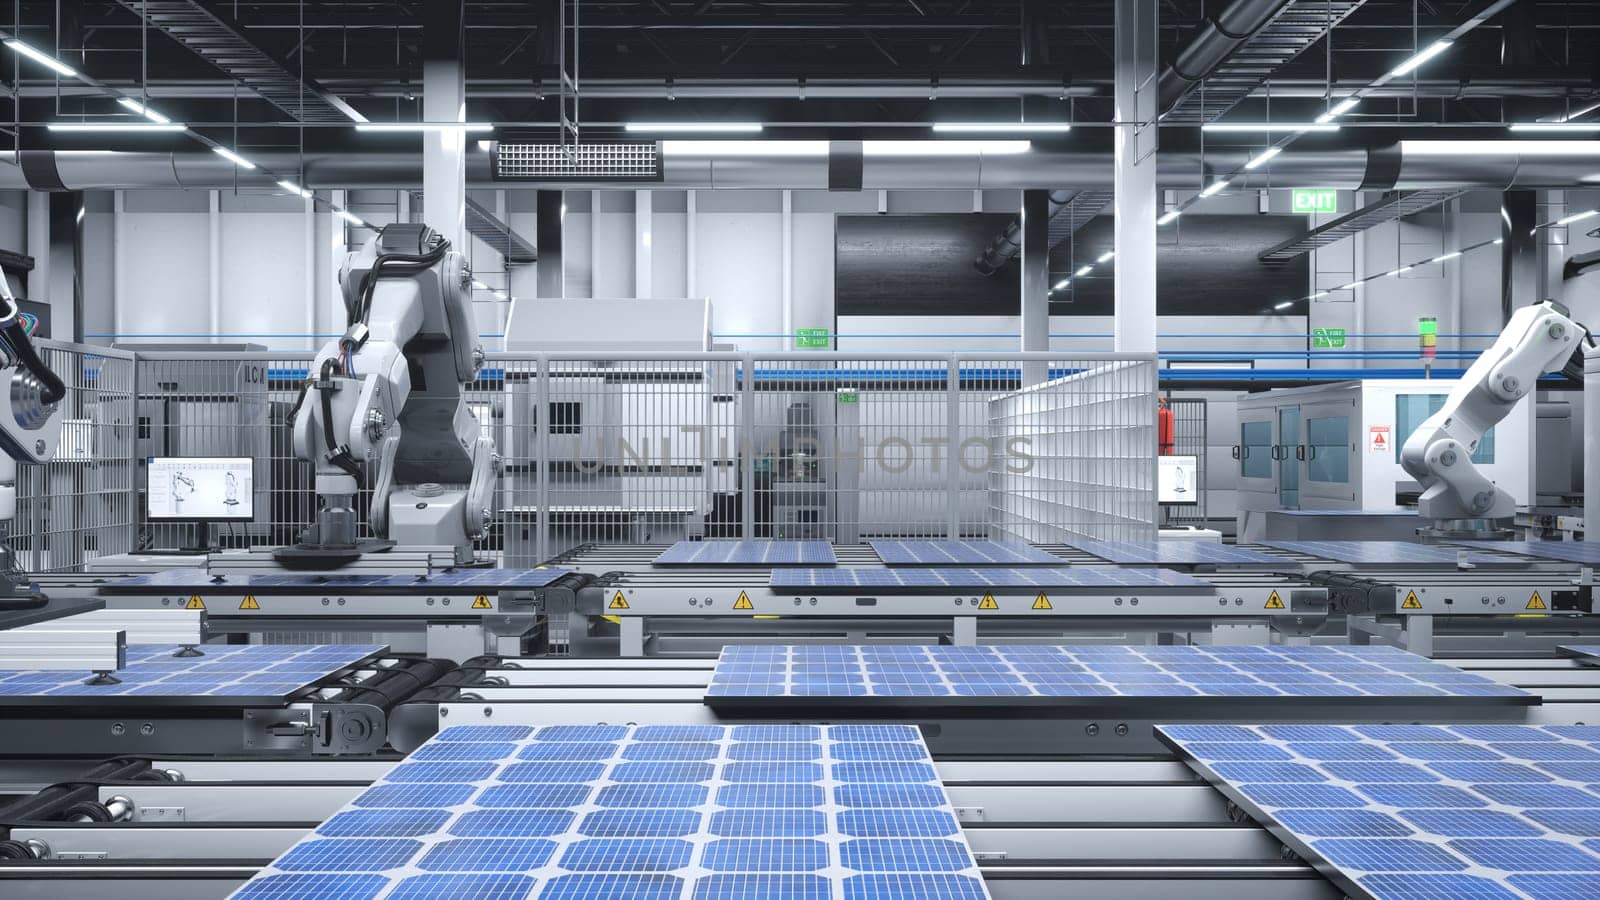 Photovoltaics assembled on conveyor belts inside facility with safety protocols by DCStudio